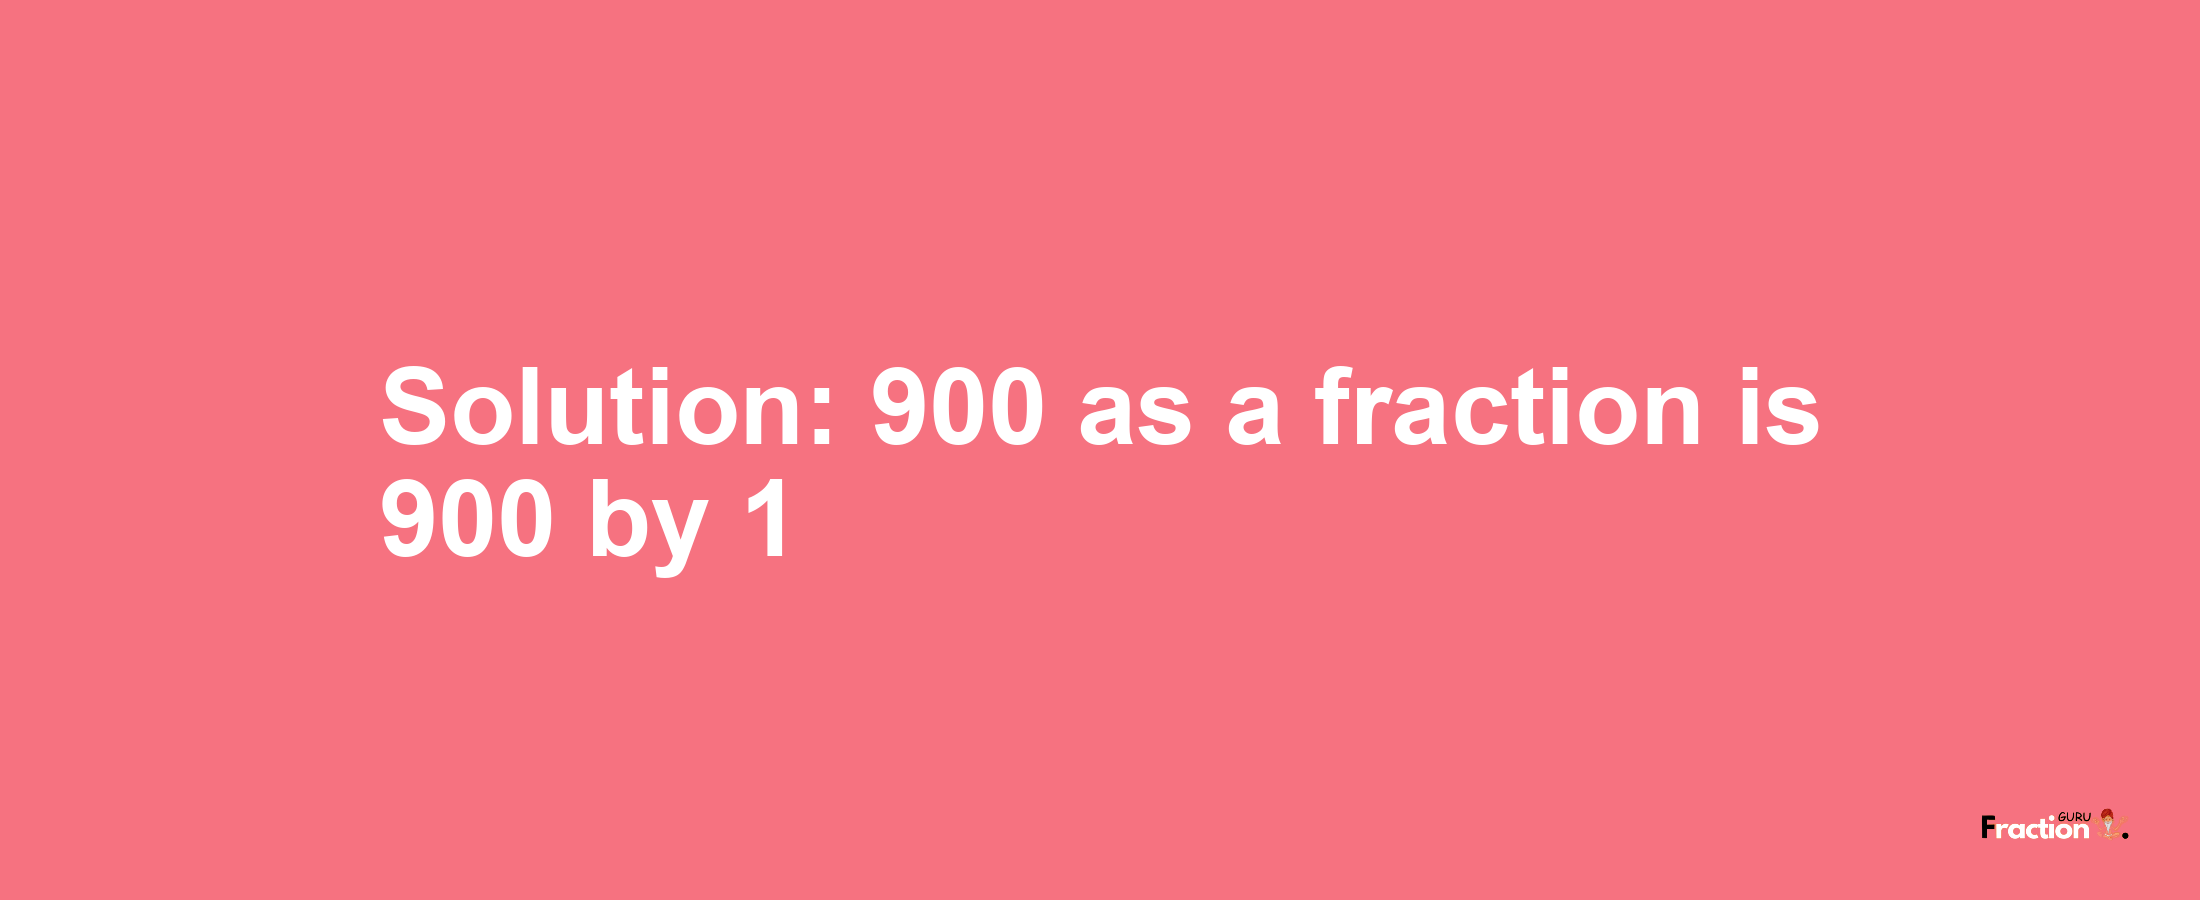 Solution:900 as a fraction is 900/1